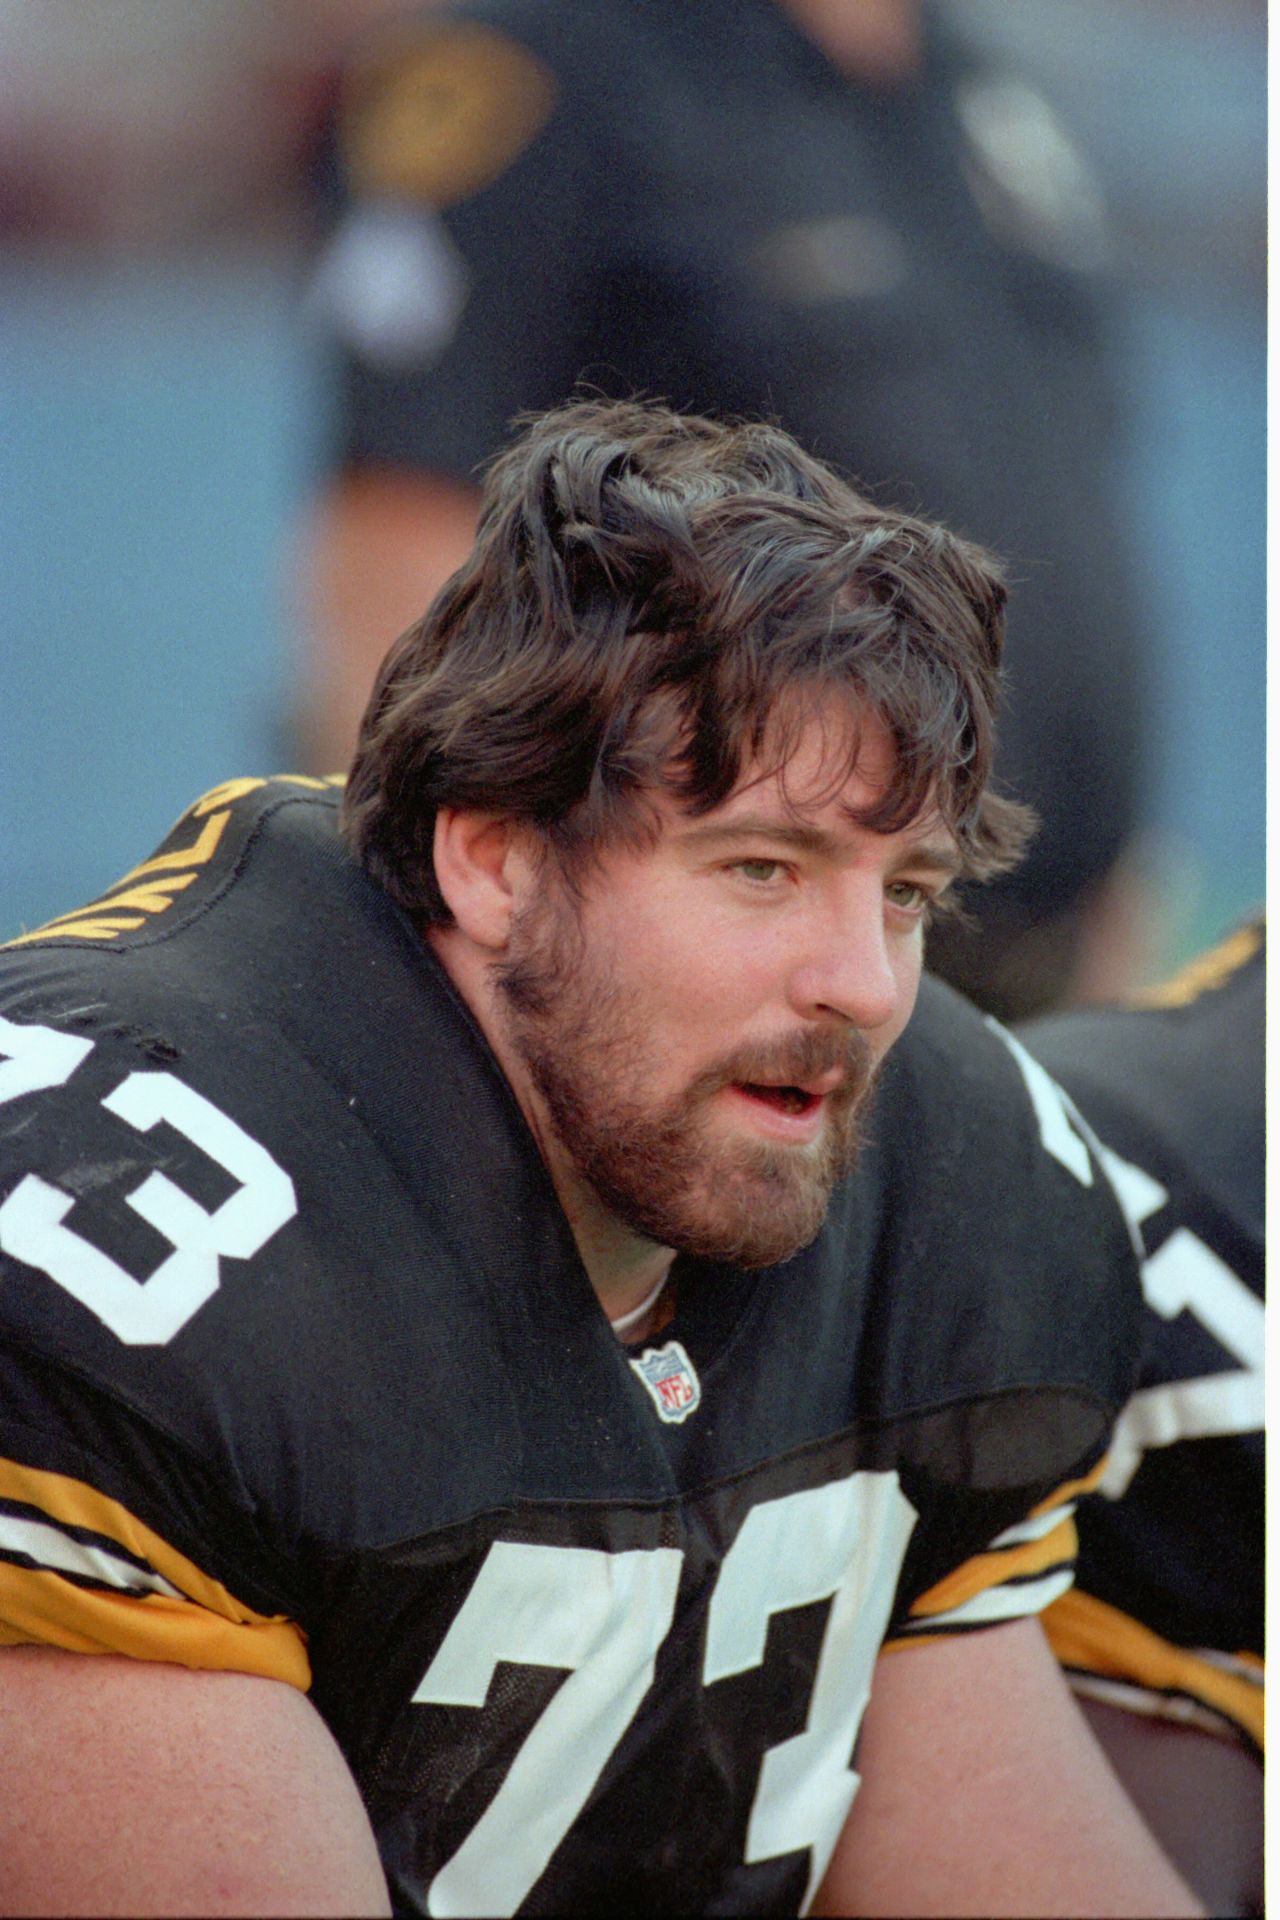 The death of 36-year-old Pittsburgh Steelers offensive lineman Justin Strzelczyk put the link between football and CTE in the national spotlight. Strzelczyk was <a href=